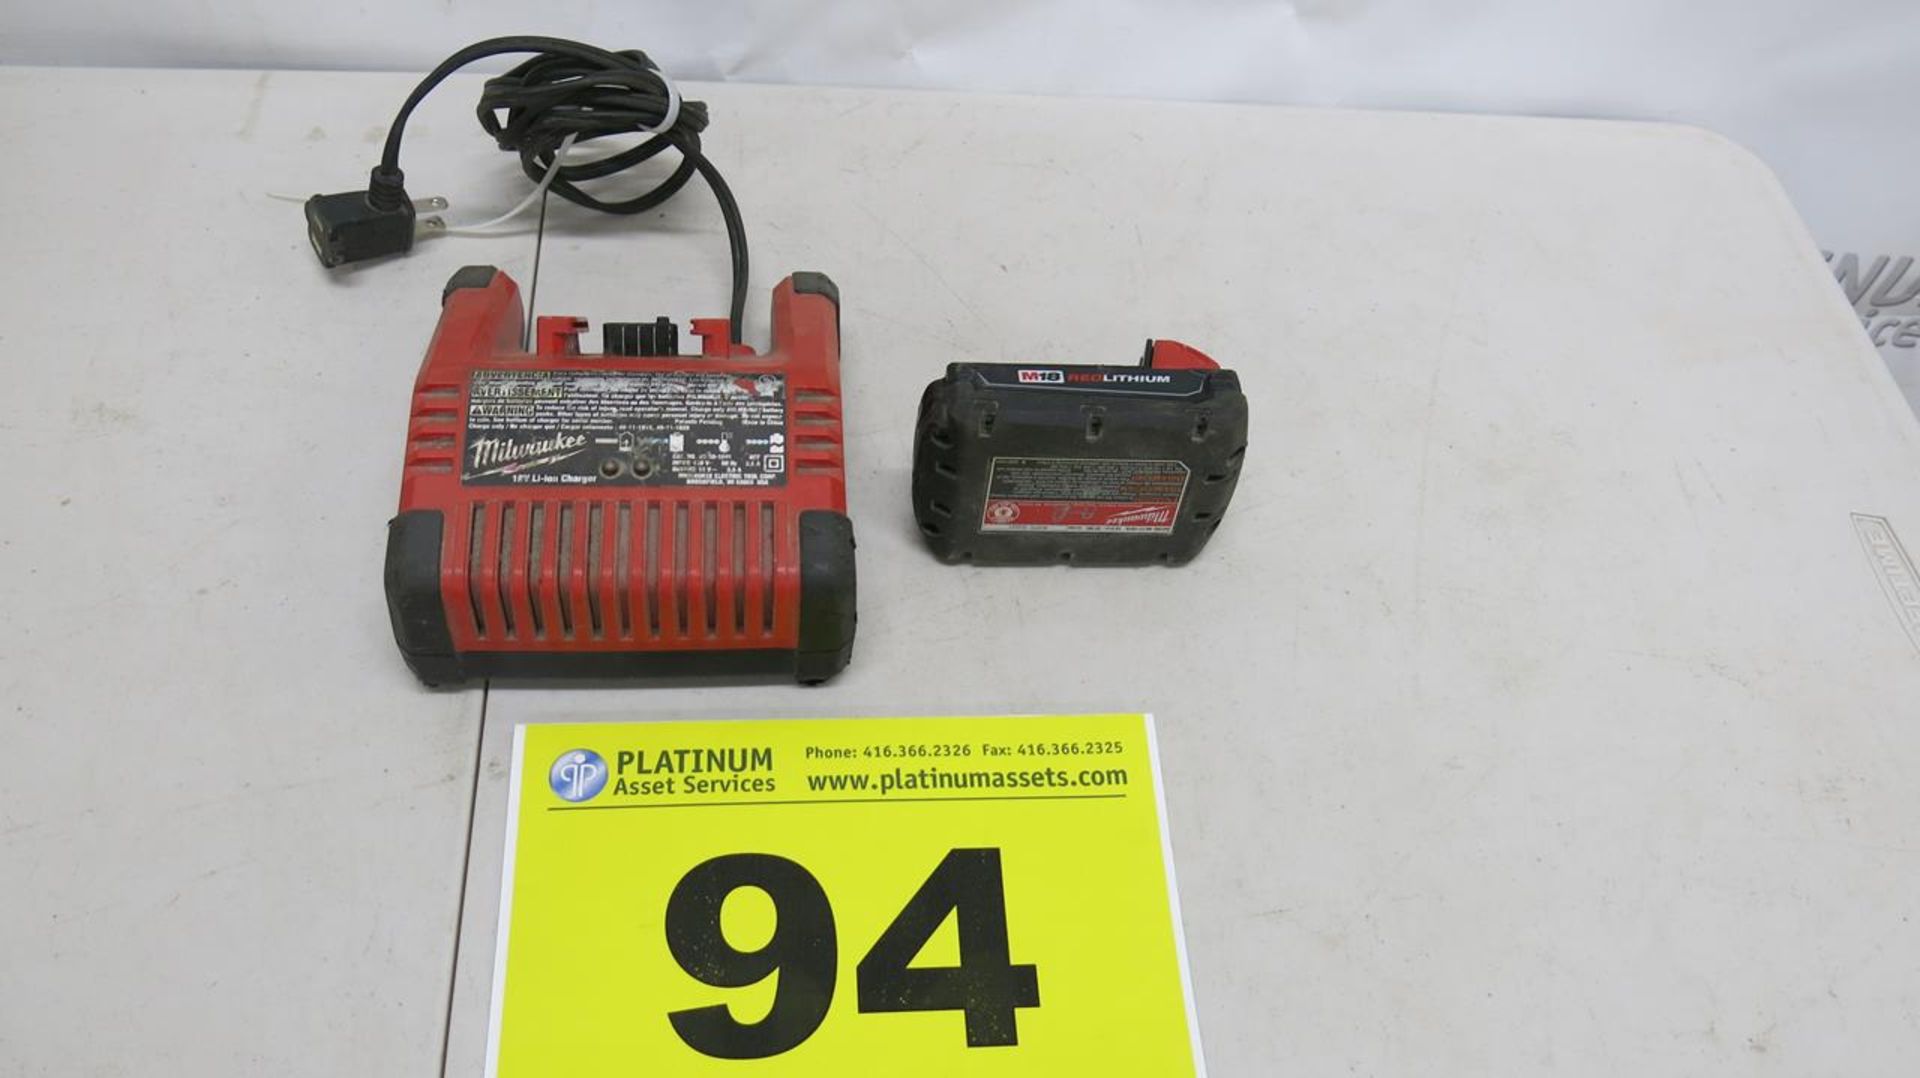 MILWAUKEE, 18V, LITHIUM BATTERY, AND CHARGER